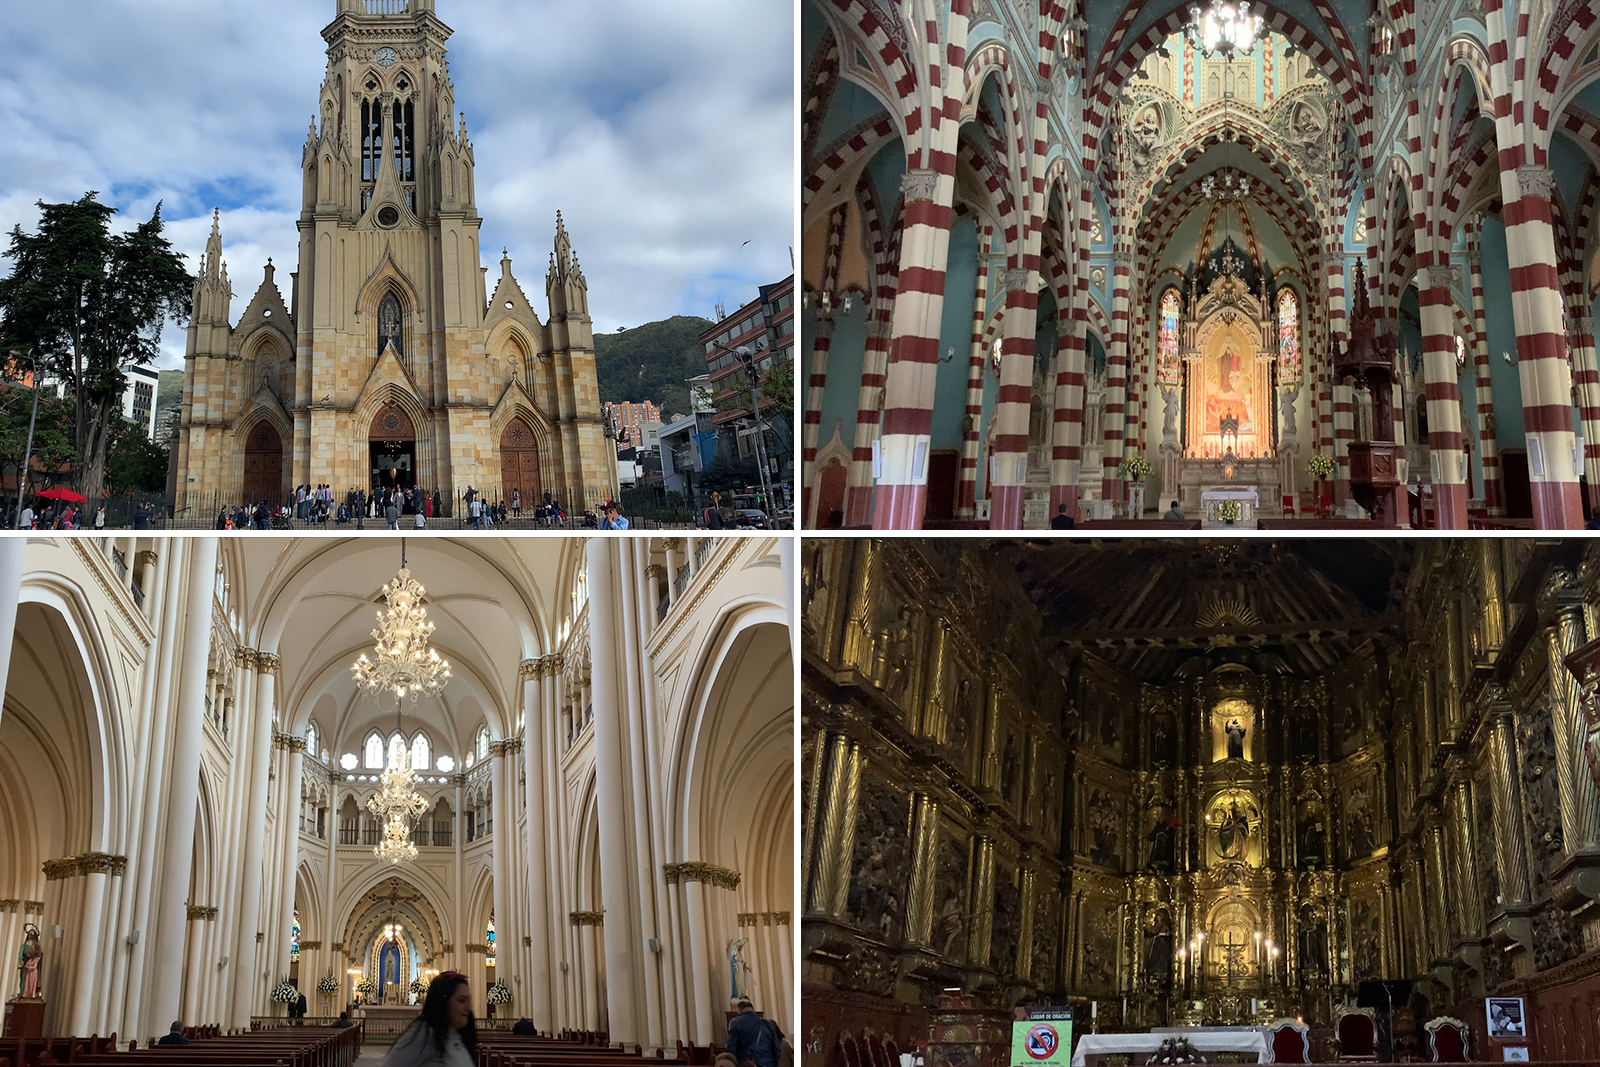 We spent hours wandering through Colombian churches.